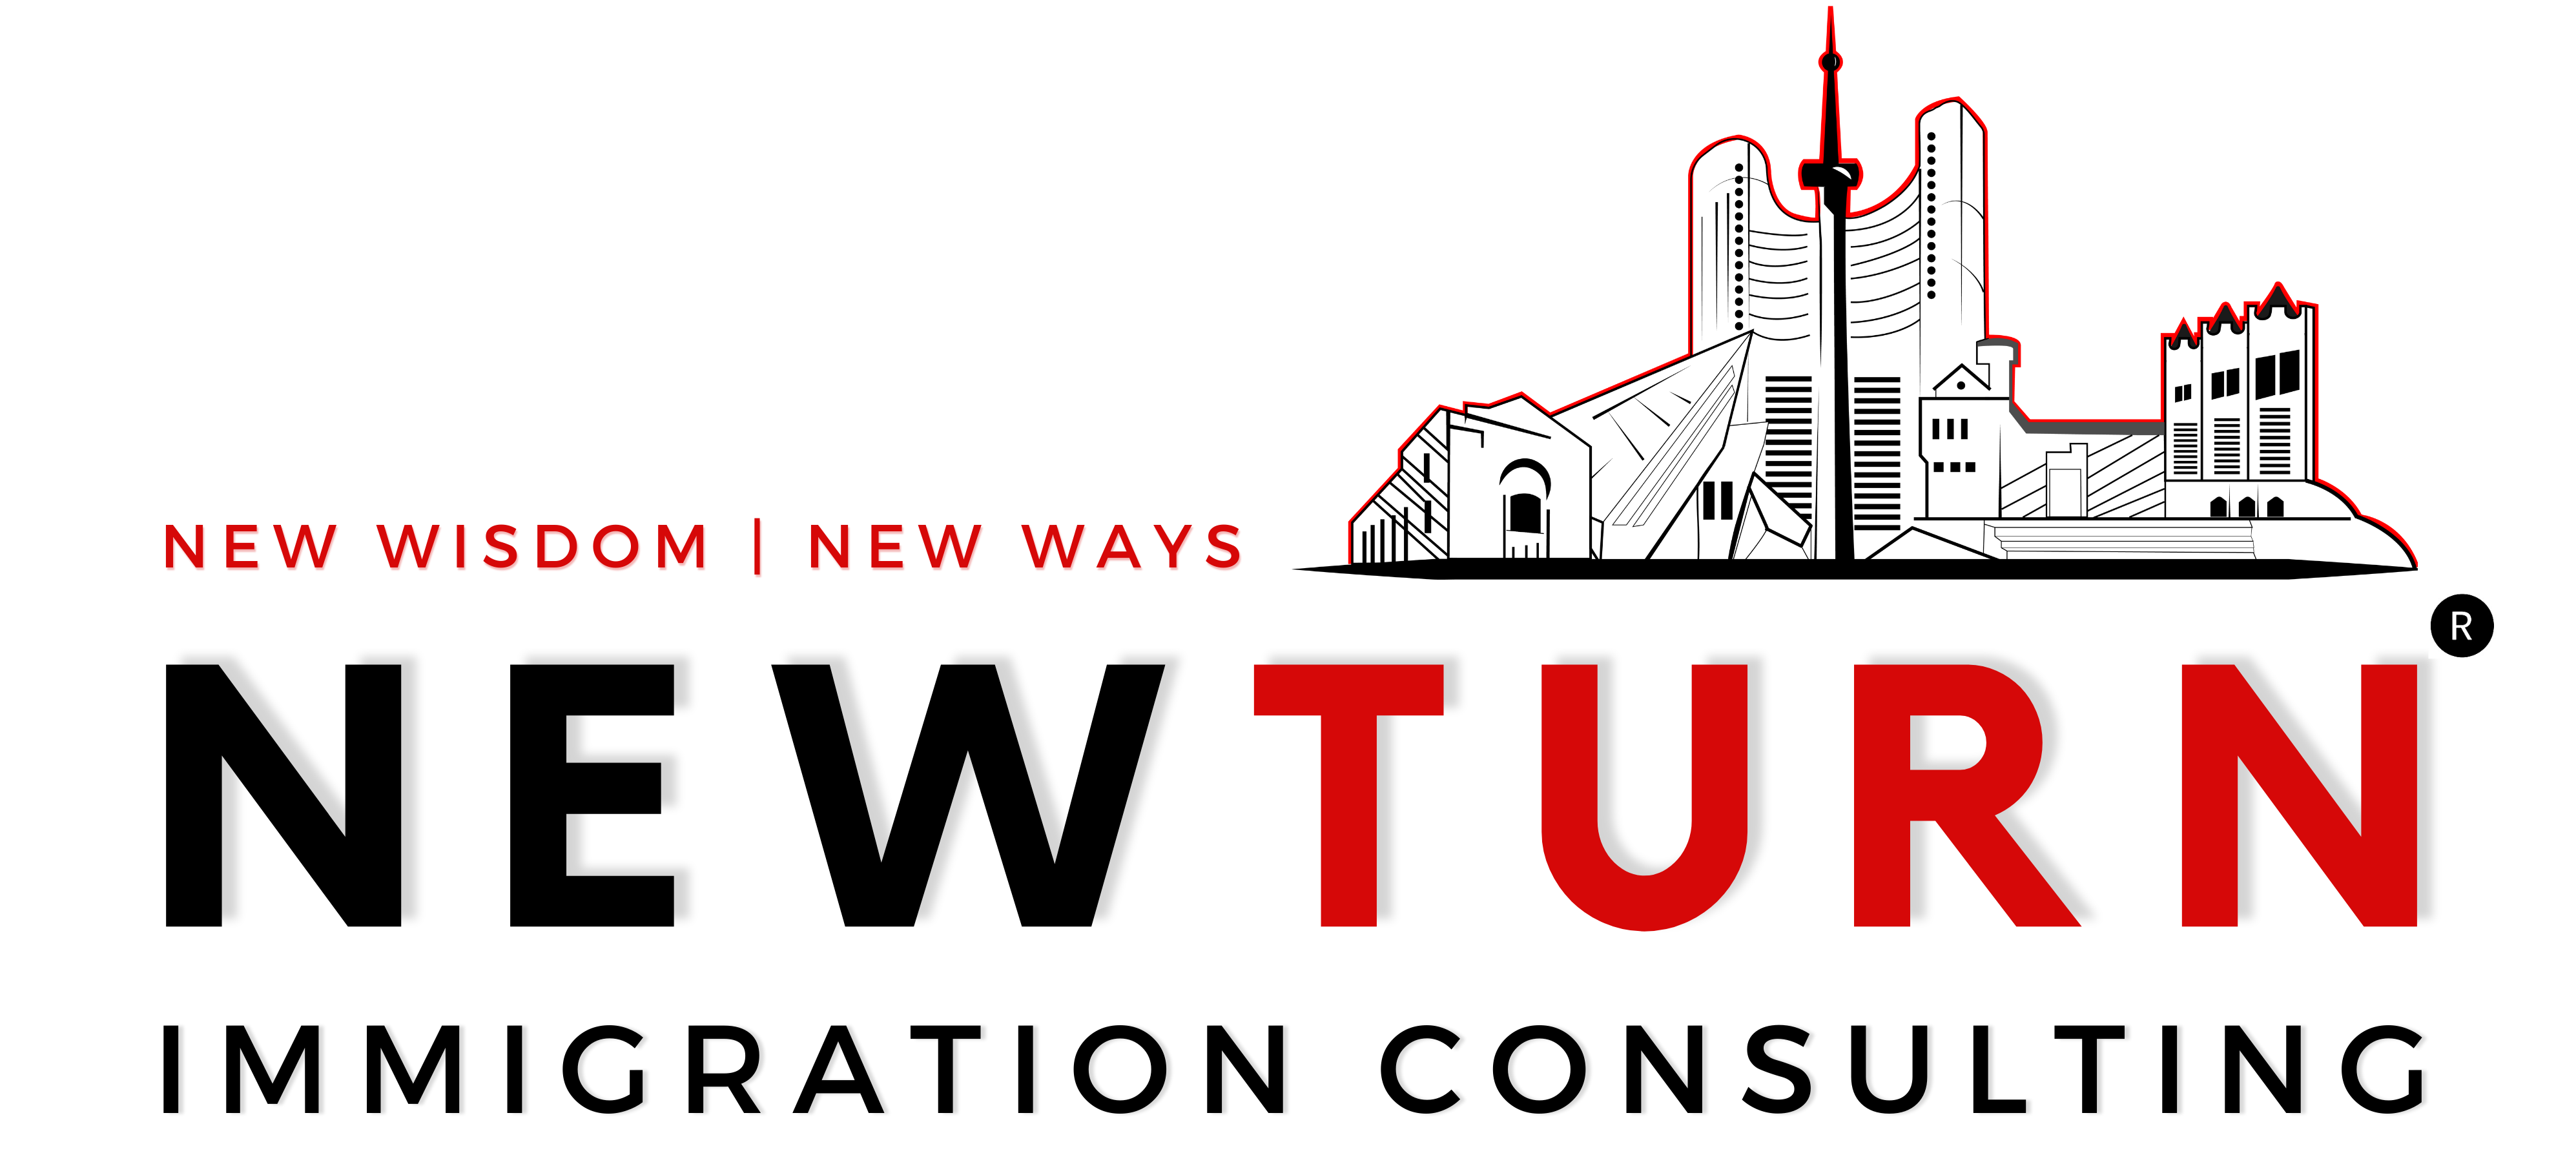 Newturn Immigration Consulting